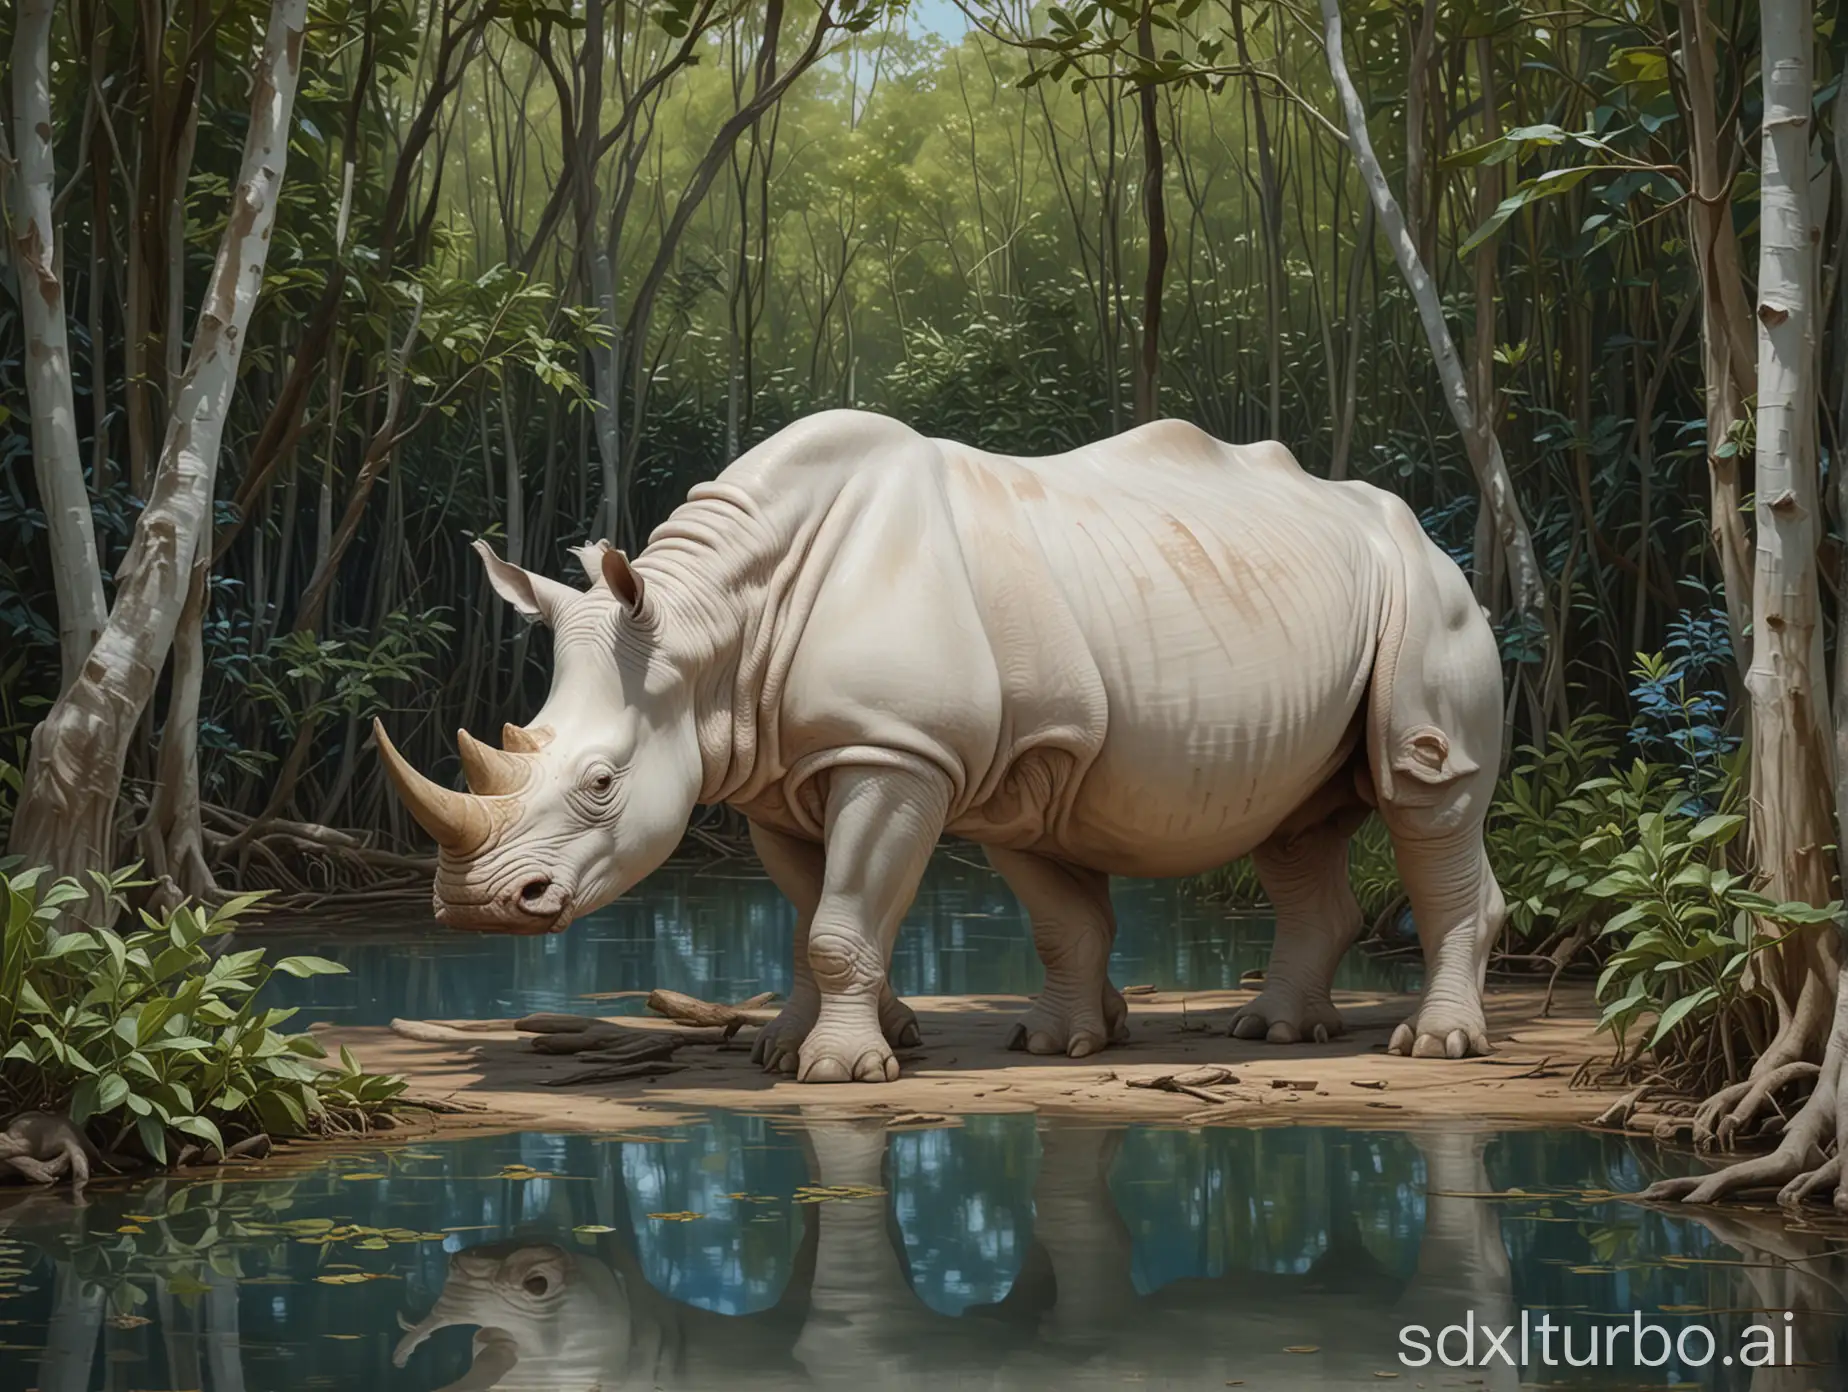 A full-body shot of an albino rhinoceros, with the background of a blue mangrove forest, in Leyendecker oil painting style.